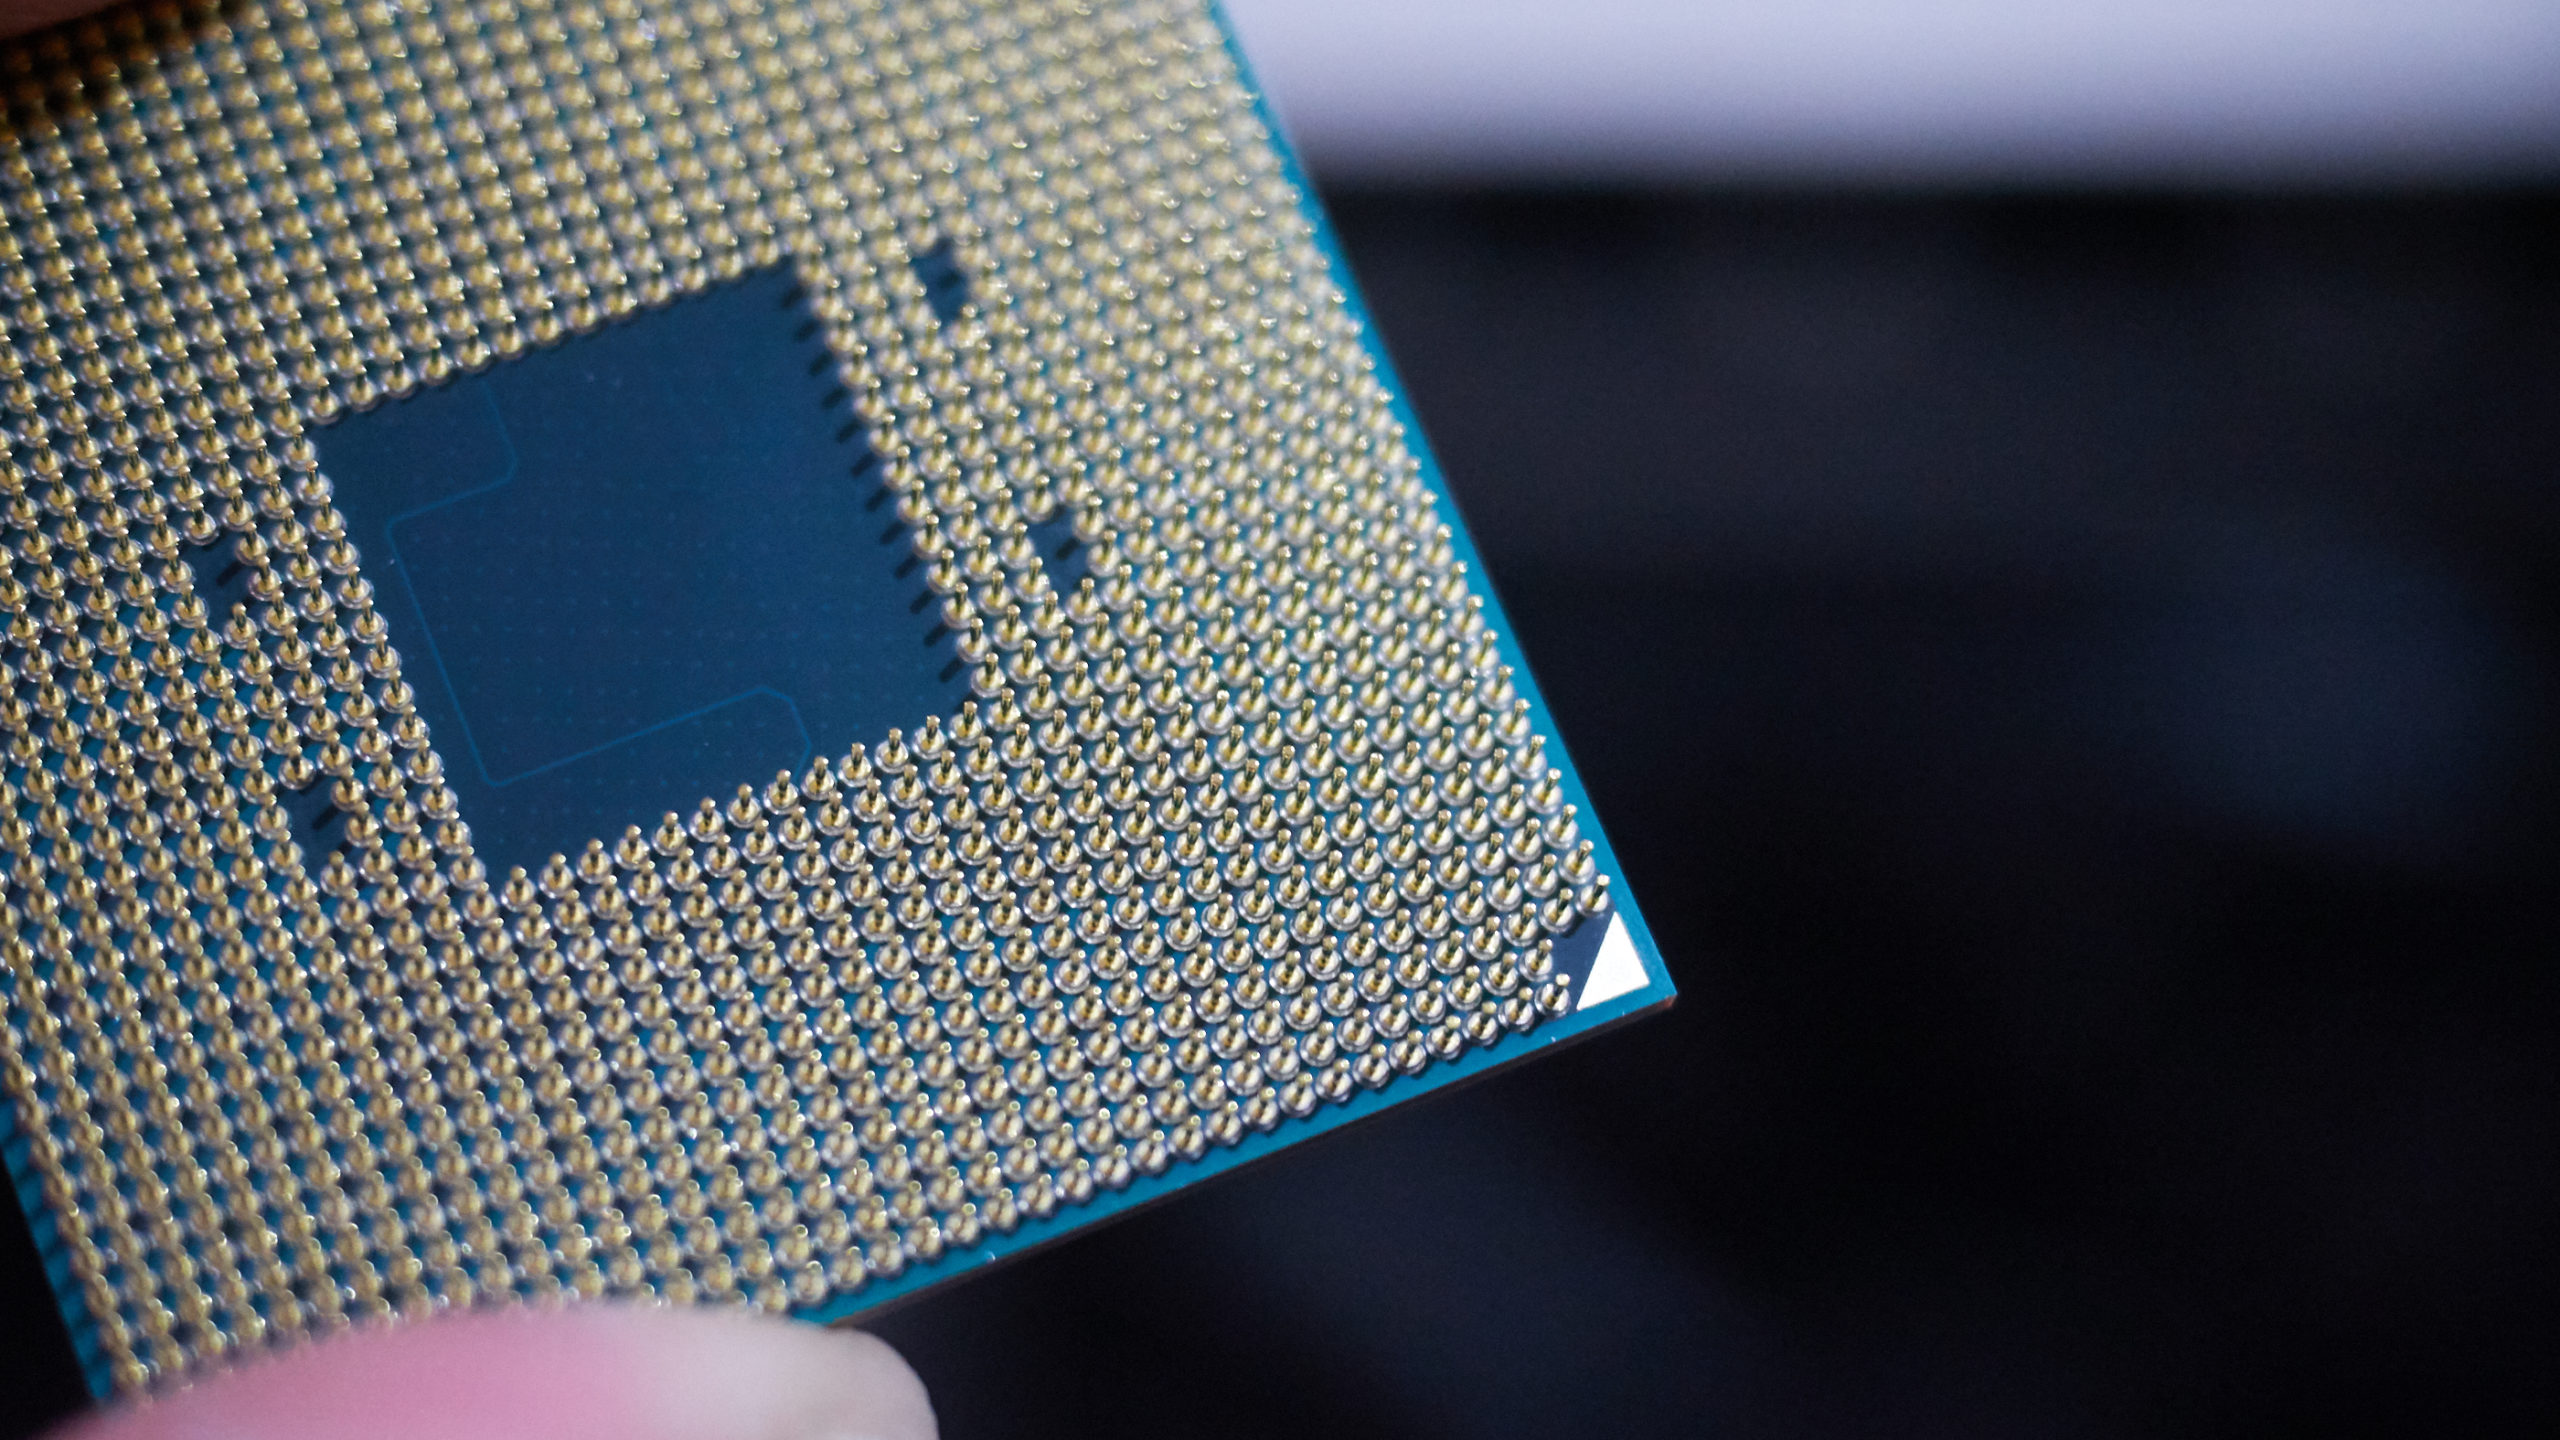 AMD’s Newest Processors Are So Good You Can Skip The Graphics Card